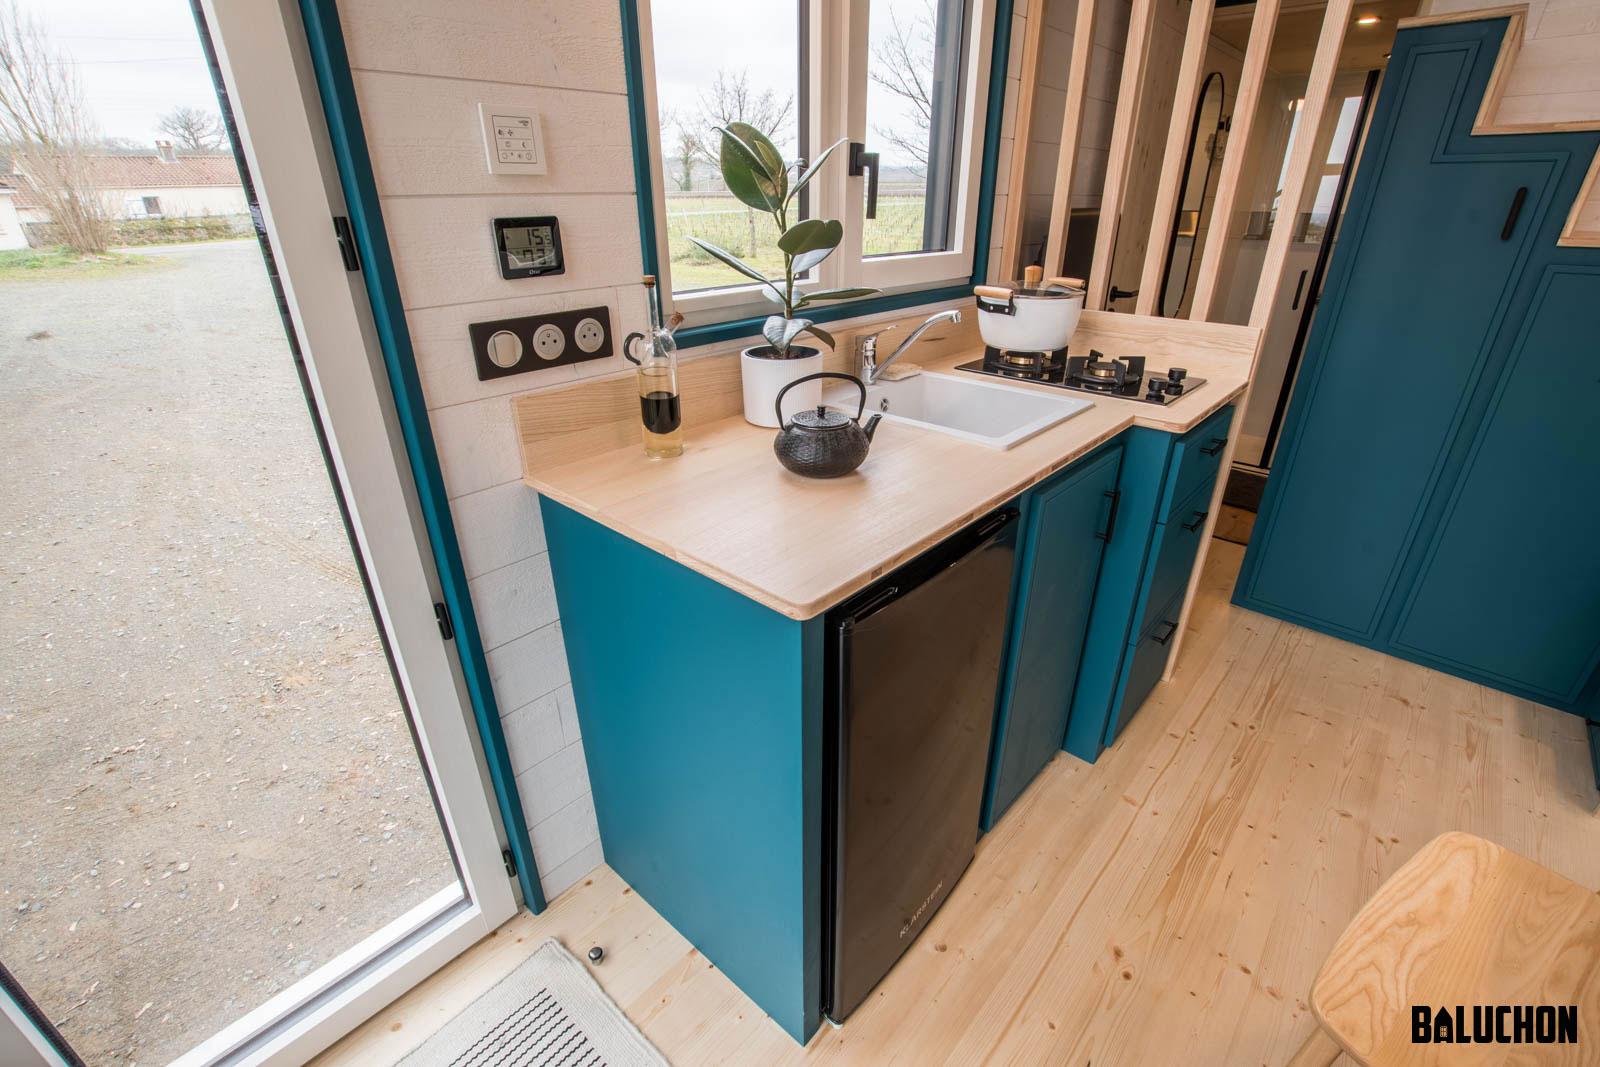 Wood Countertop and Teal Cabinets in Kitchen - Sherpa by Baluchon